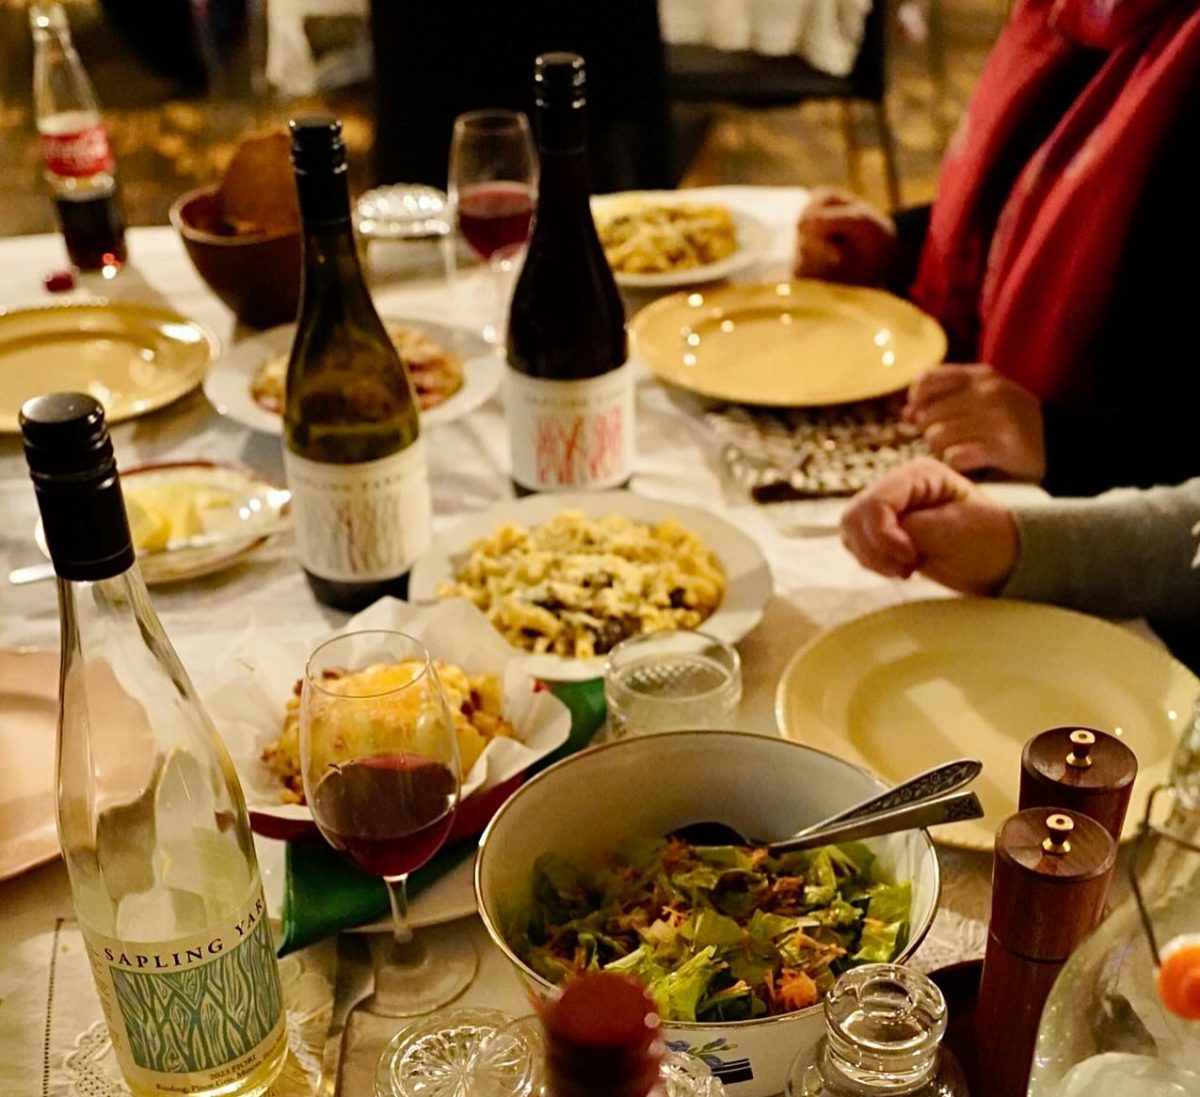 Table with many dishes of food and bottles of sapling yard wines.